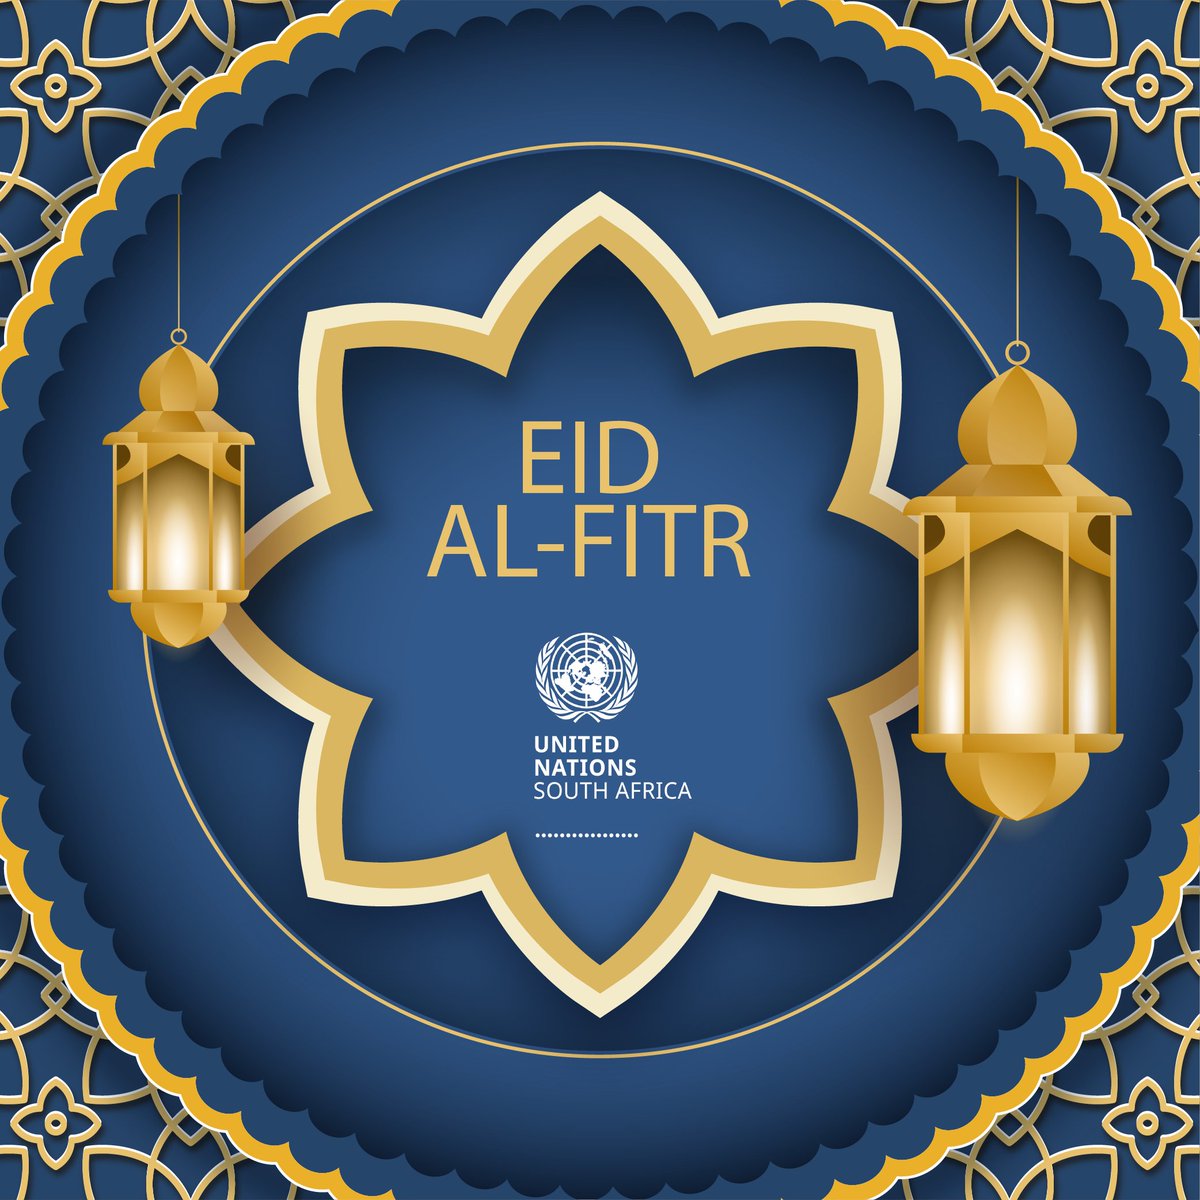 As we celebrate Eid al-Fitr, let’s take a moment to reflect on the profound values it represents - unity, compassion, and gratitude. This occasion presents us with an opportunity to come together in solidarity and understanding. #EidMubarak